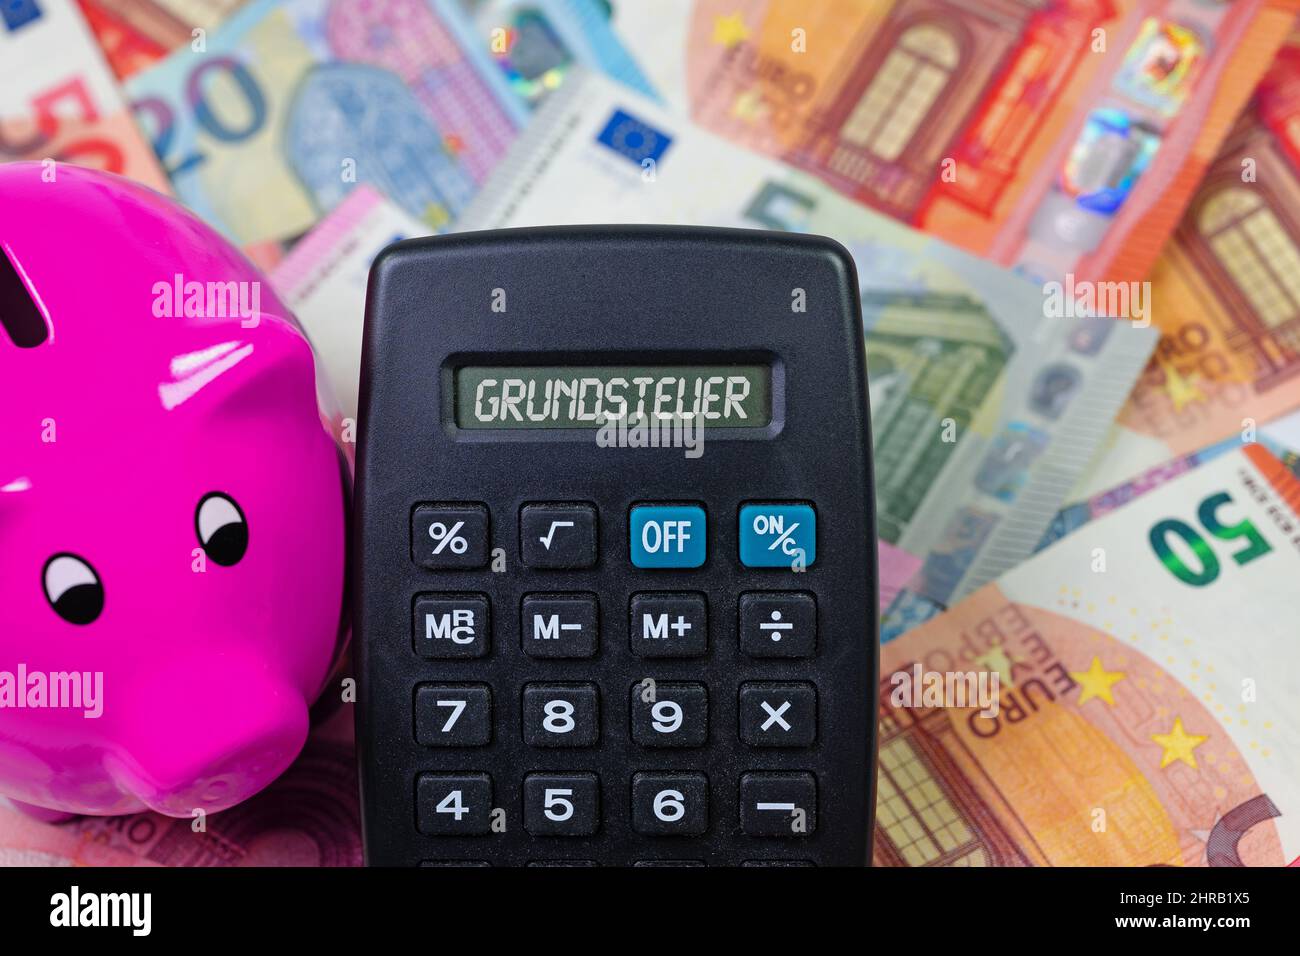 Calculator with the word 'Grundsteuer', translation 'Property Tax' on the display Stock Photo